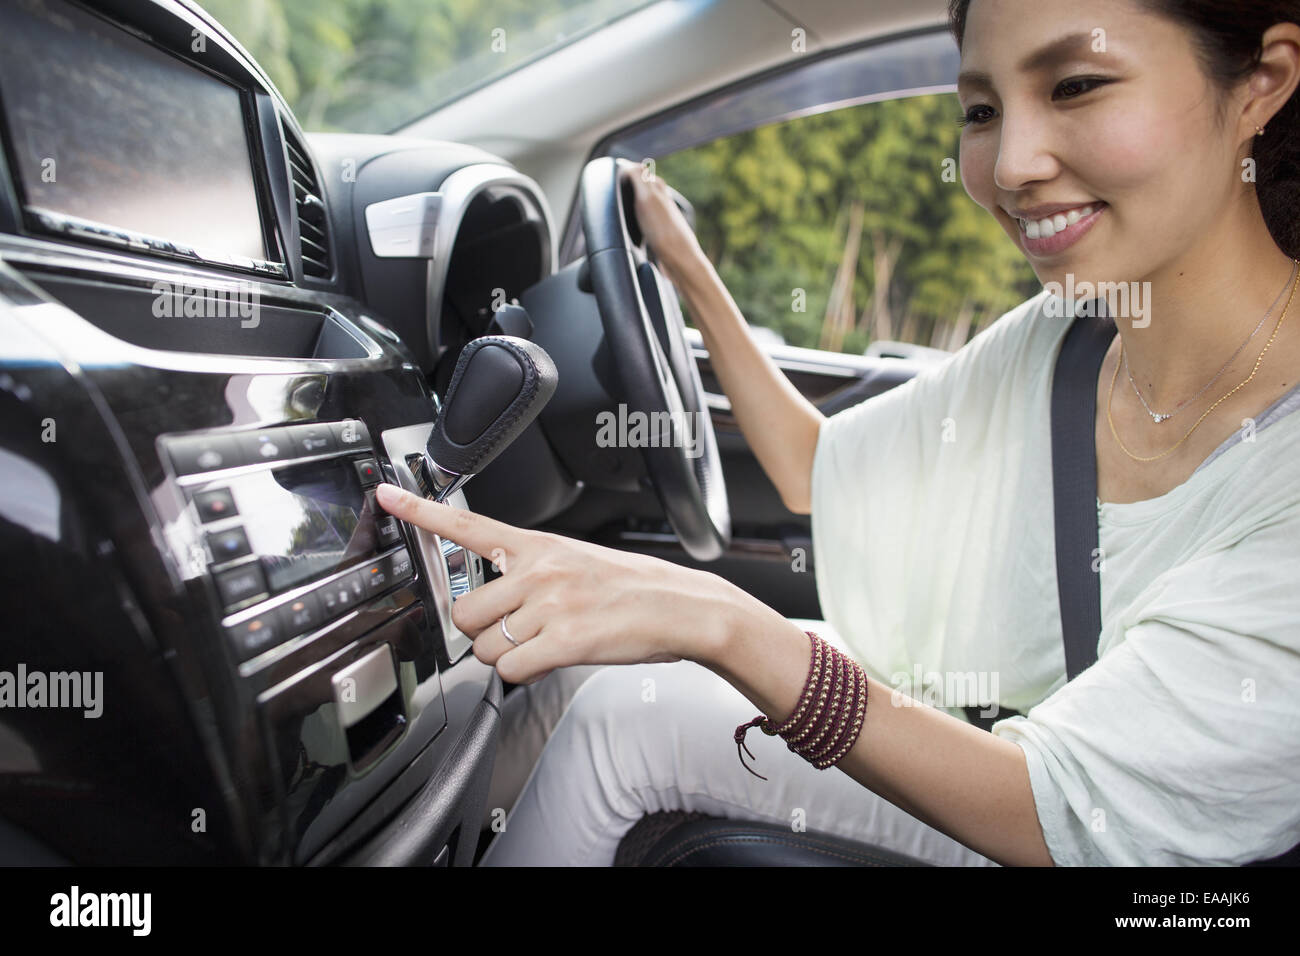 A young woman sitting in her car. Stock Photo